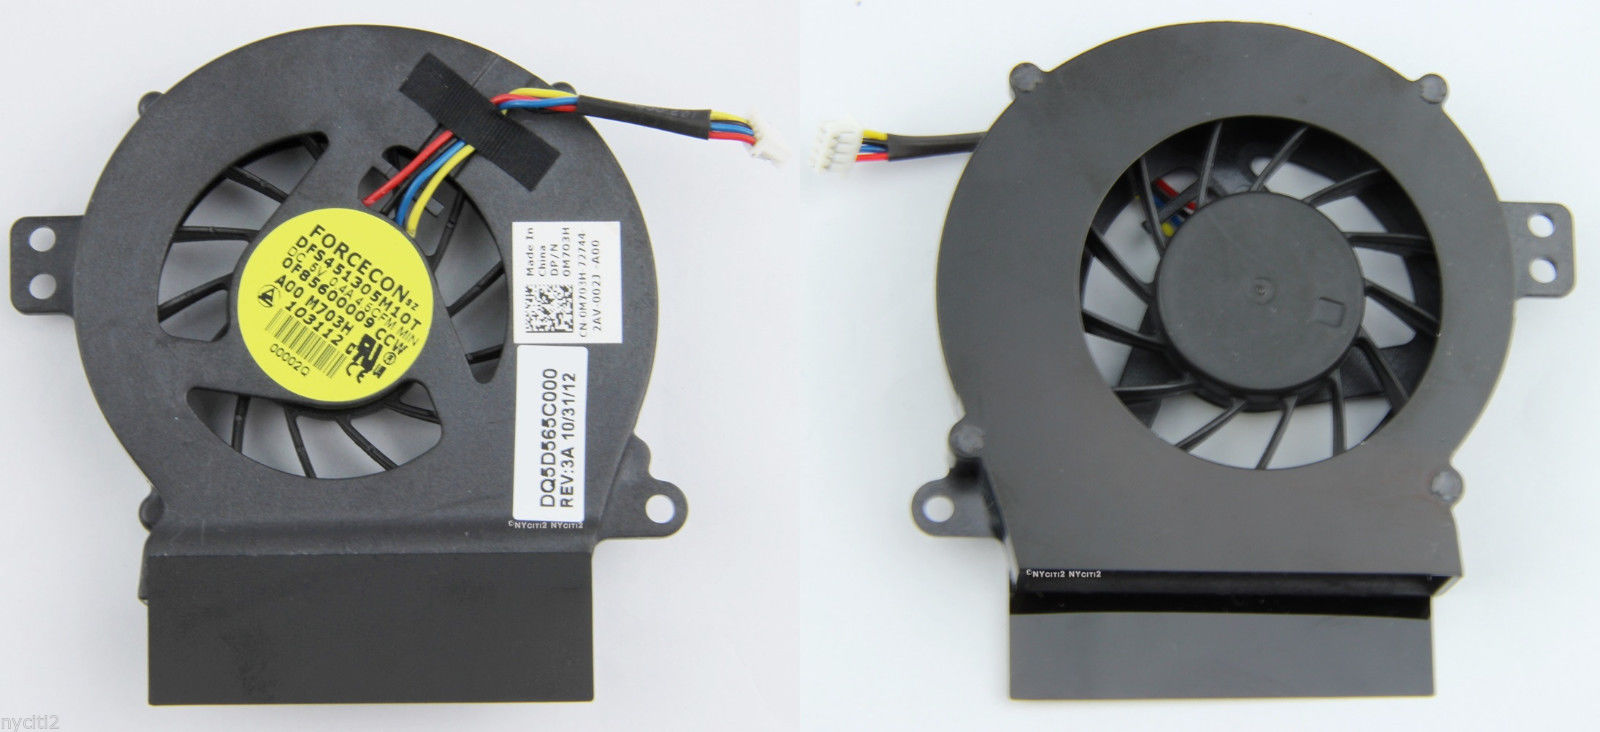 Laptop CPU Fan for Dell Vostro compatible with P/N 0M703H DQ5D565C000